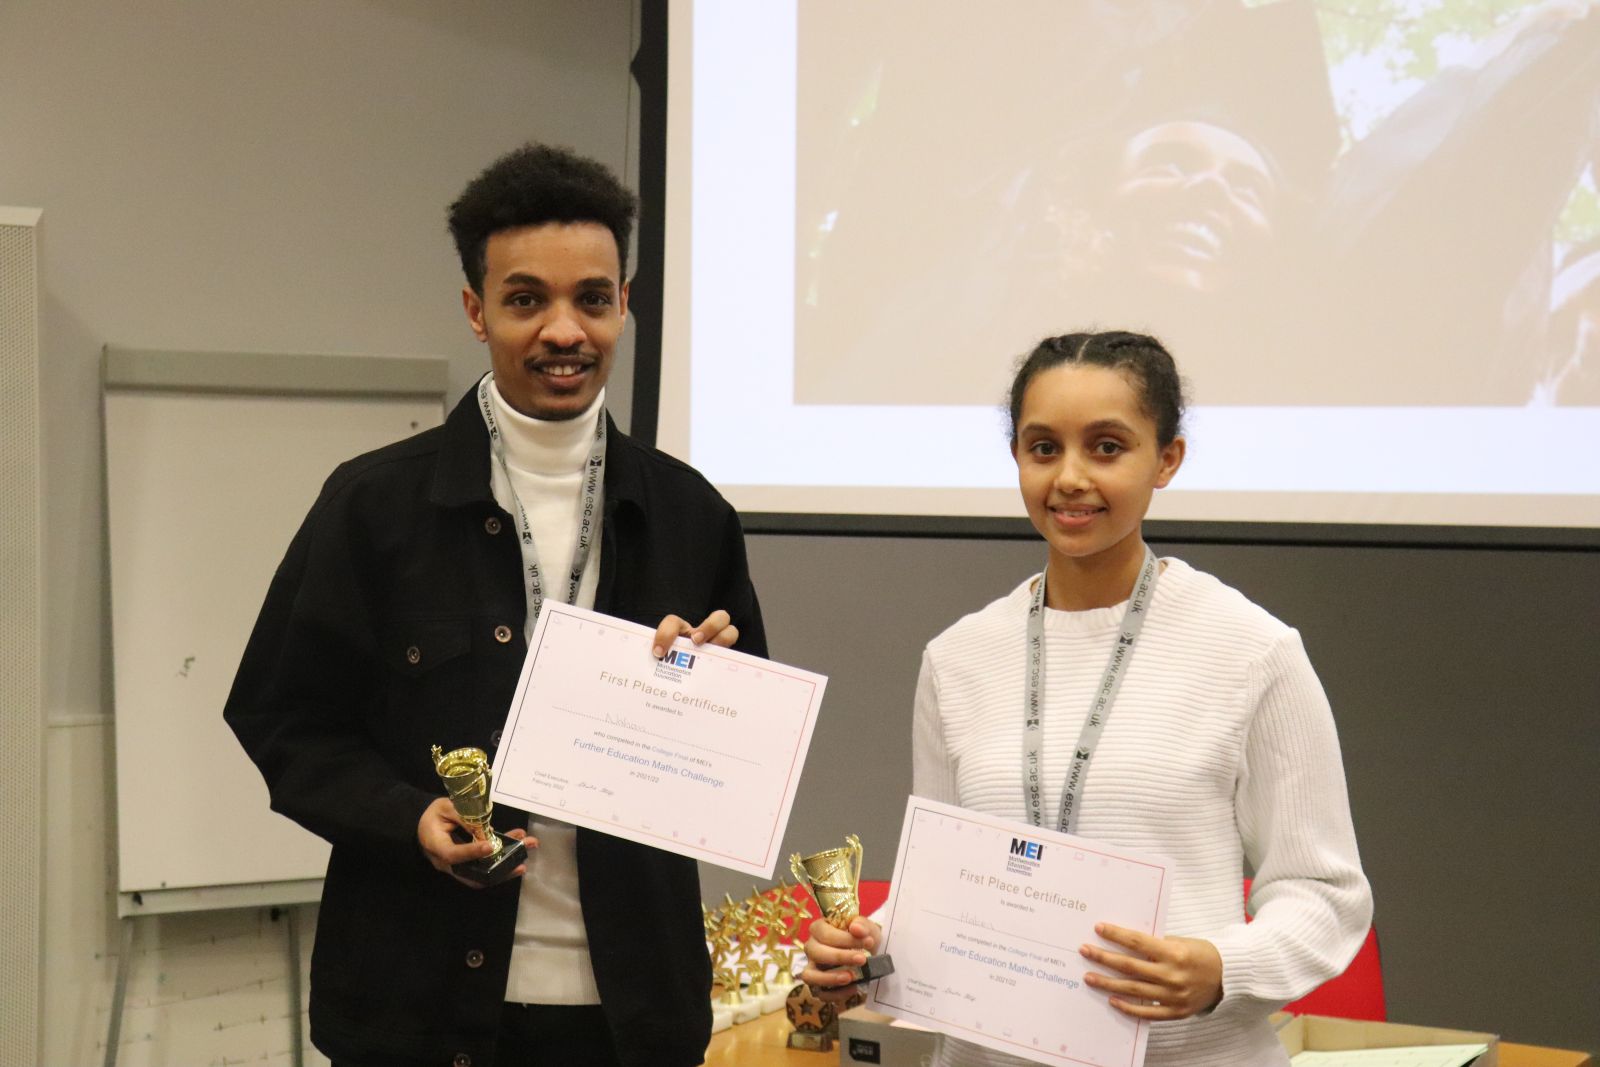 ESOL students win first place at a Maths competition at East Surrey College